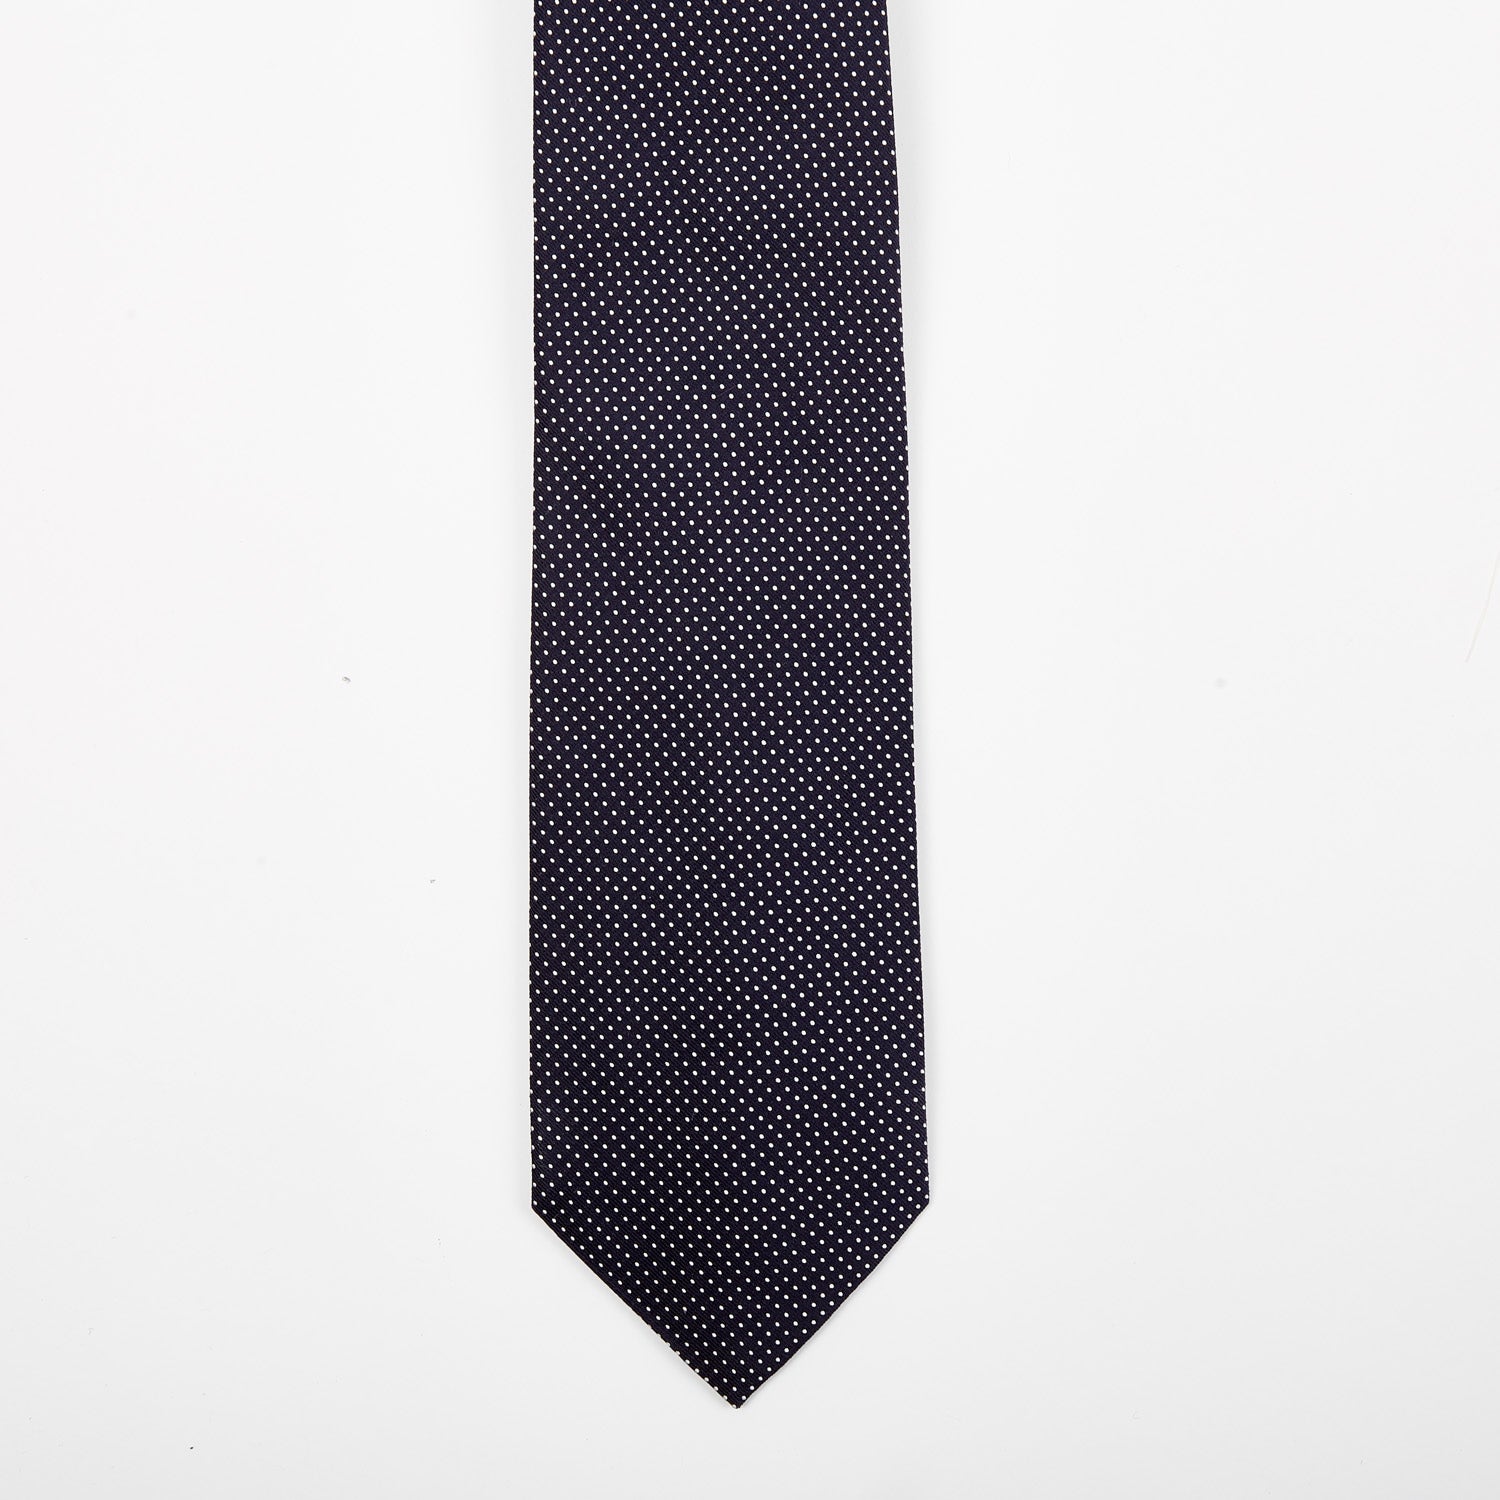 A Sovereign Grade Navy Silk Micro Dot Tie from KirbyAllison.com on a quality white background.